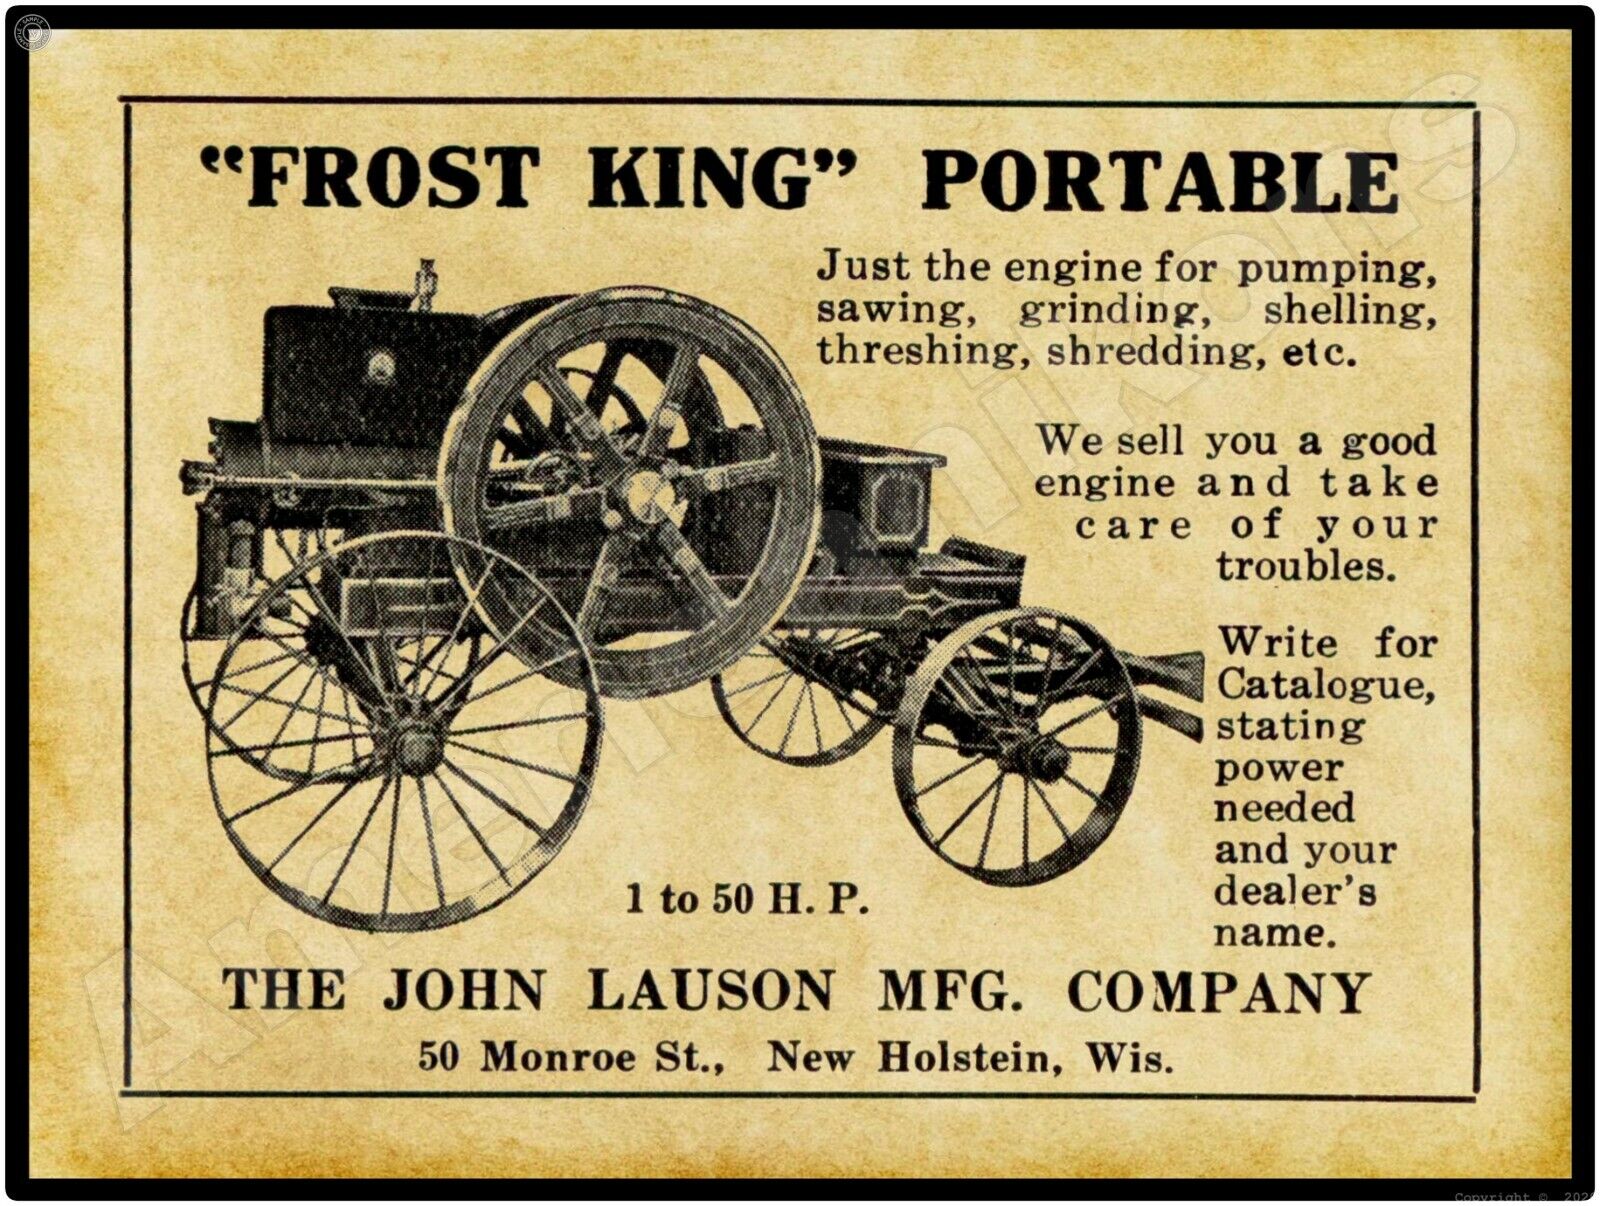 1911 John Lauson Frost King Gas Engines New Metal Sign: New Holstein, Wisconsin